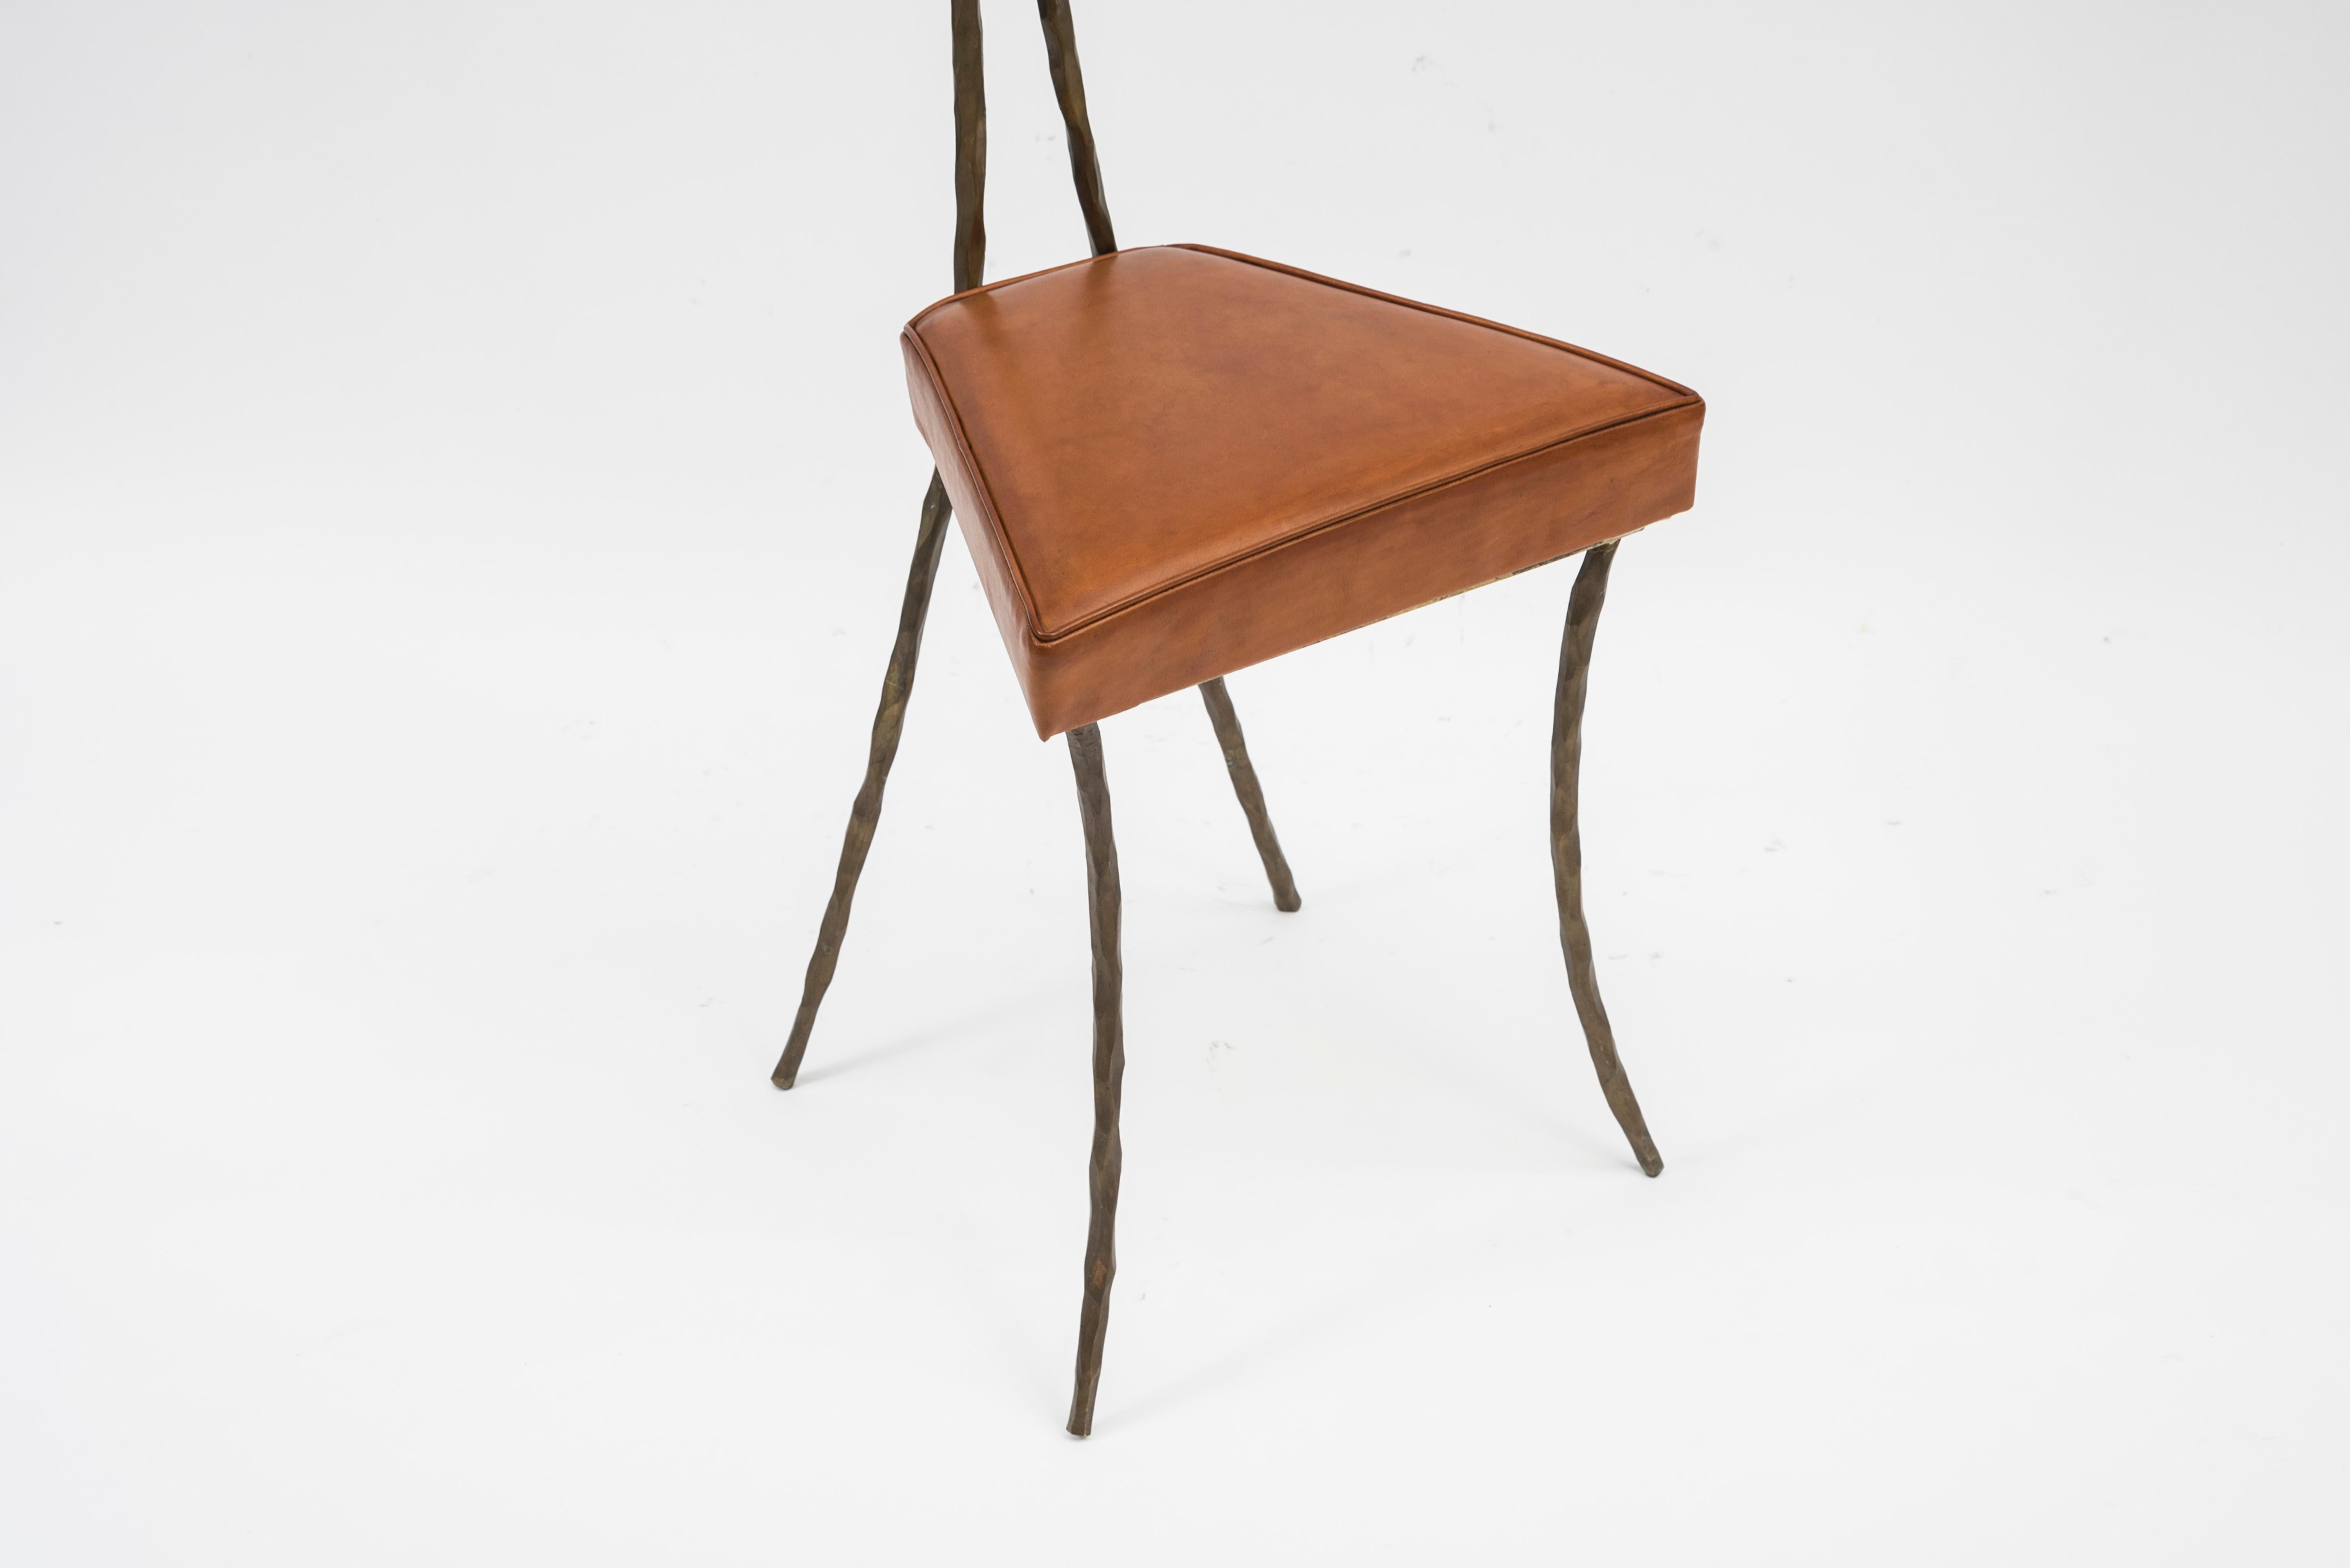 Bronze chair with leather seat
Can be sold one by one
France
1980s.